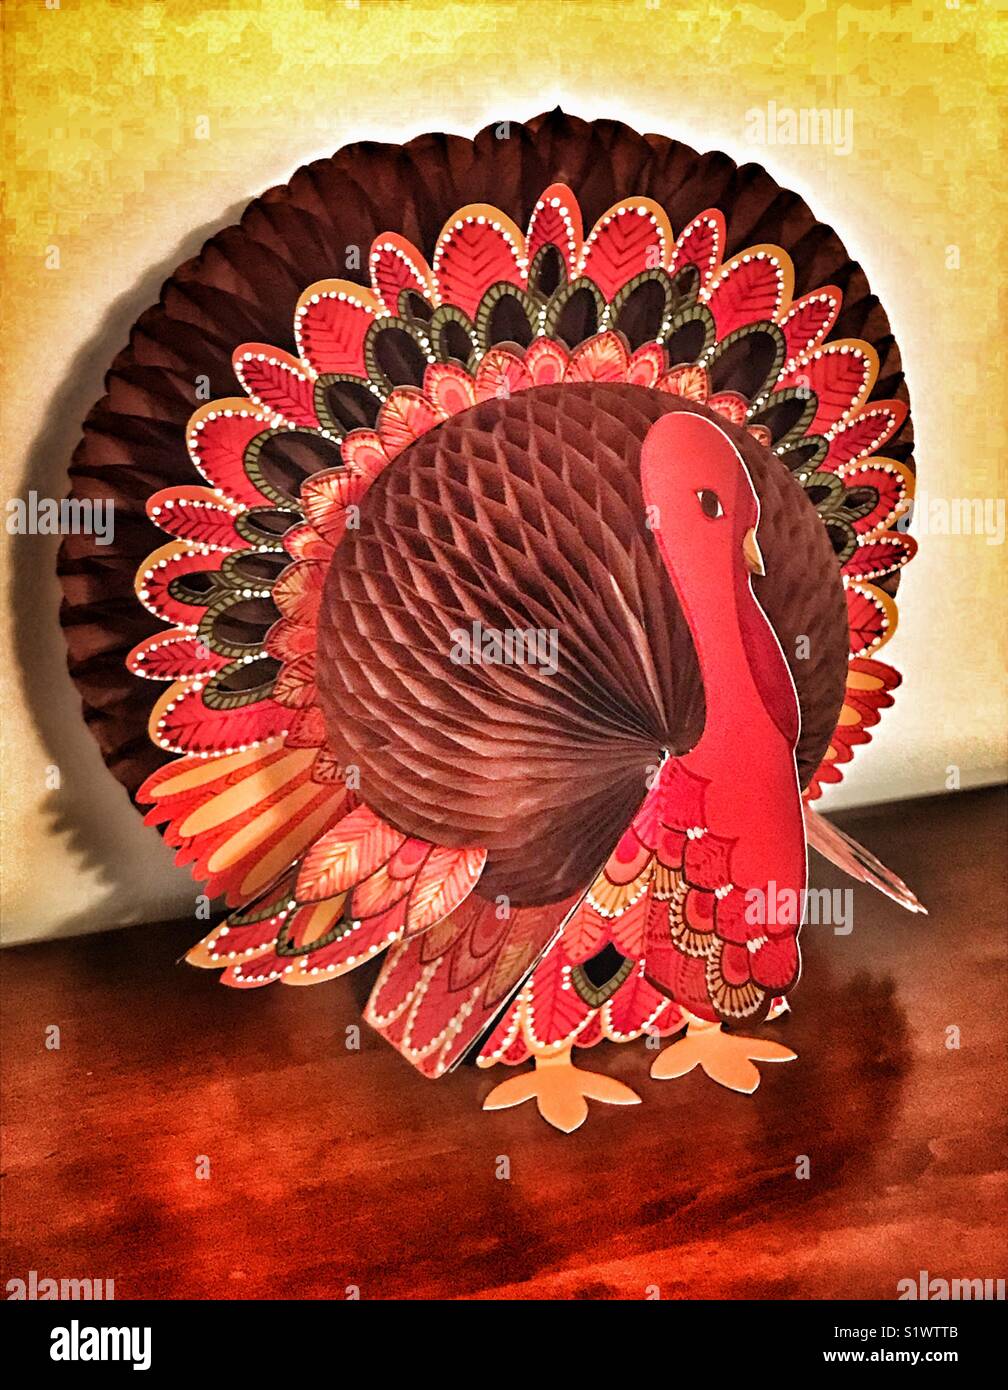 Vintage paper fold-out Thanksgiving turkey decoration Stock Photo